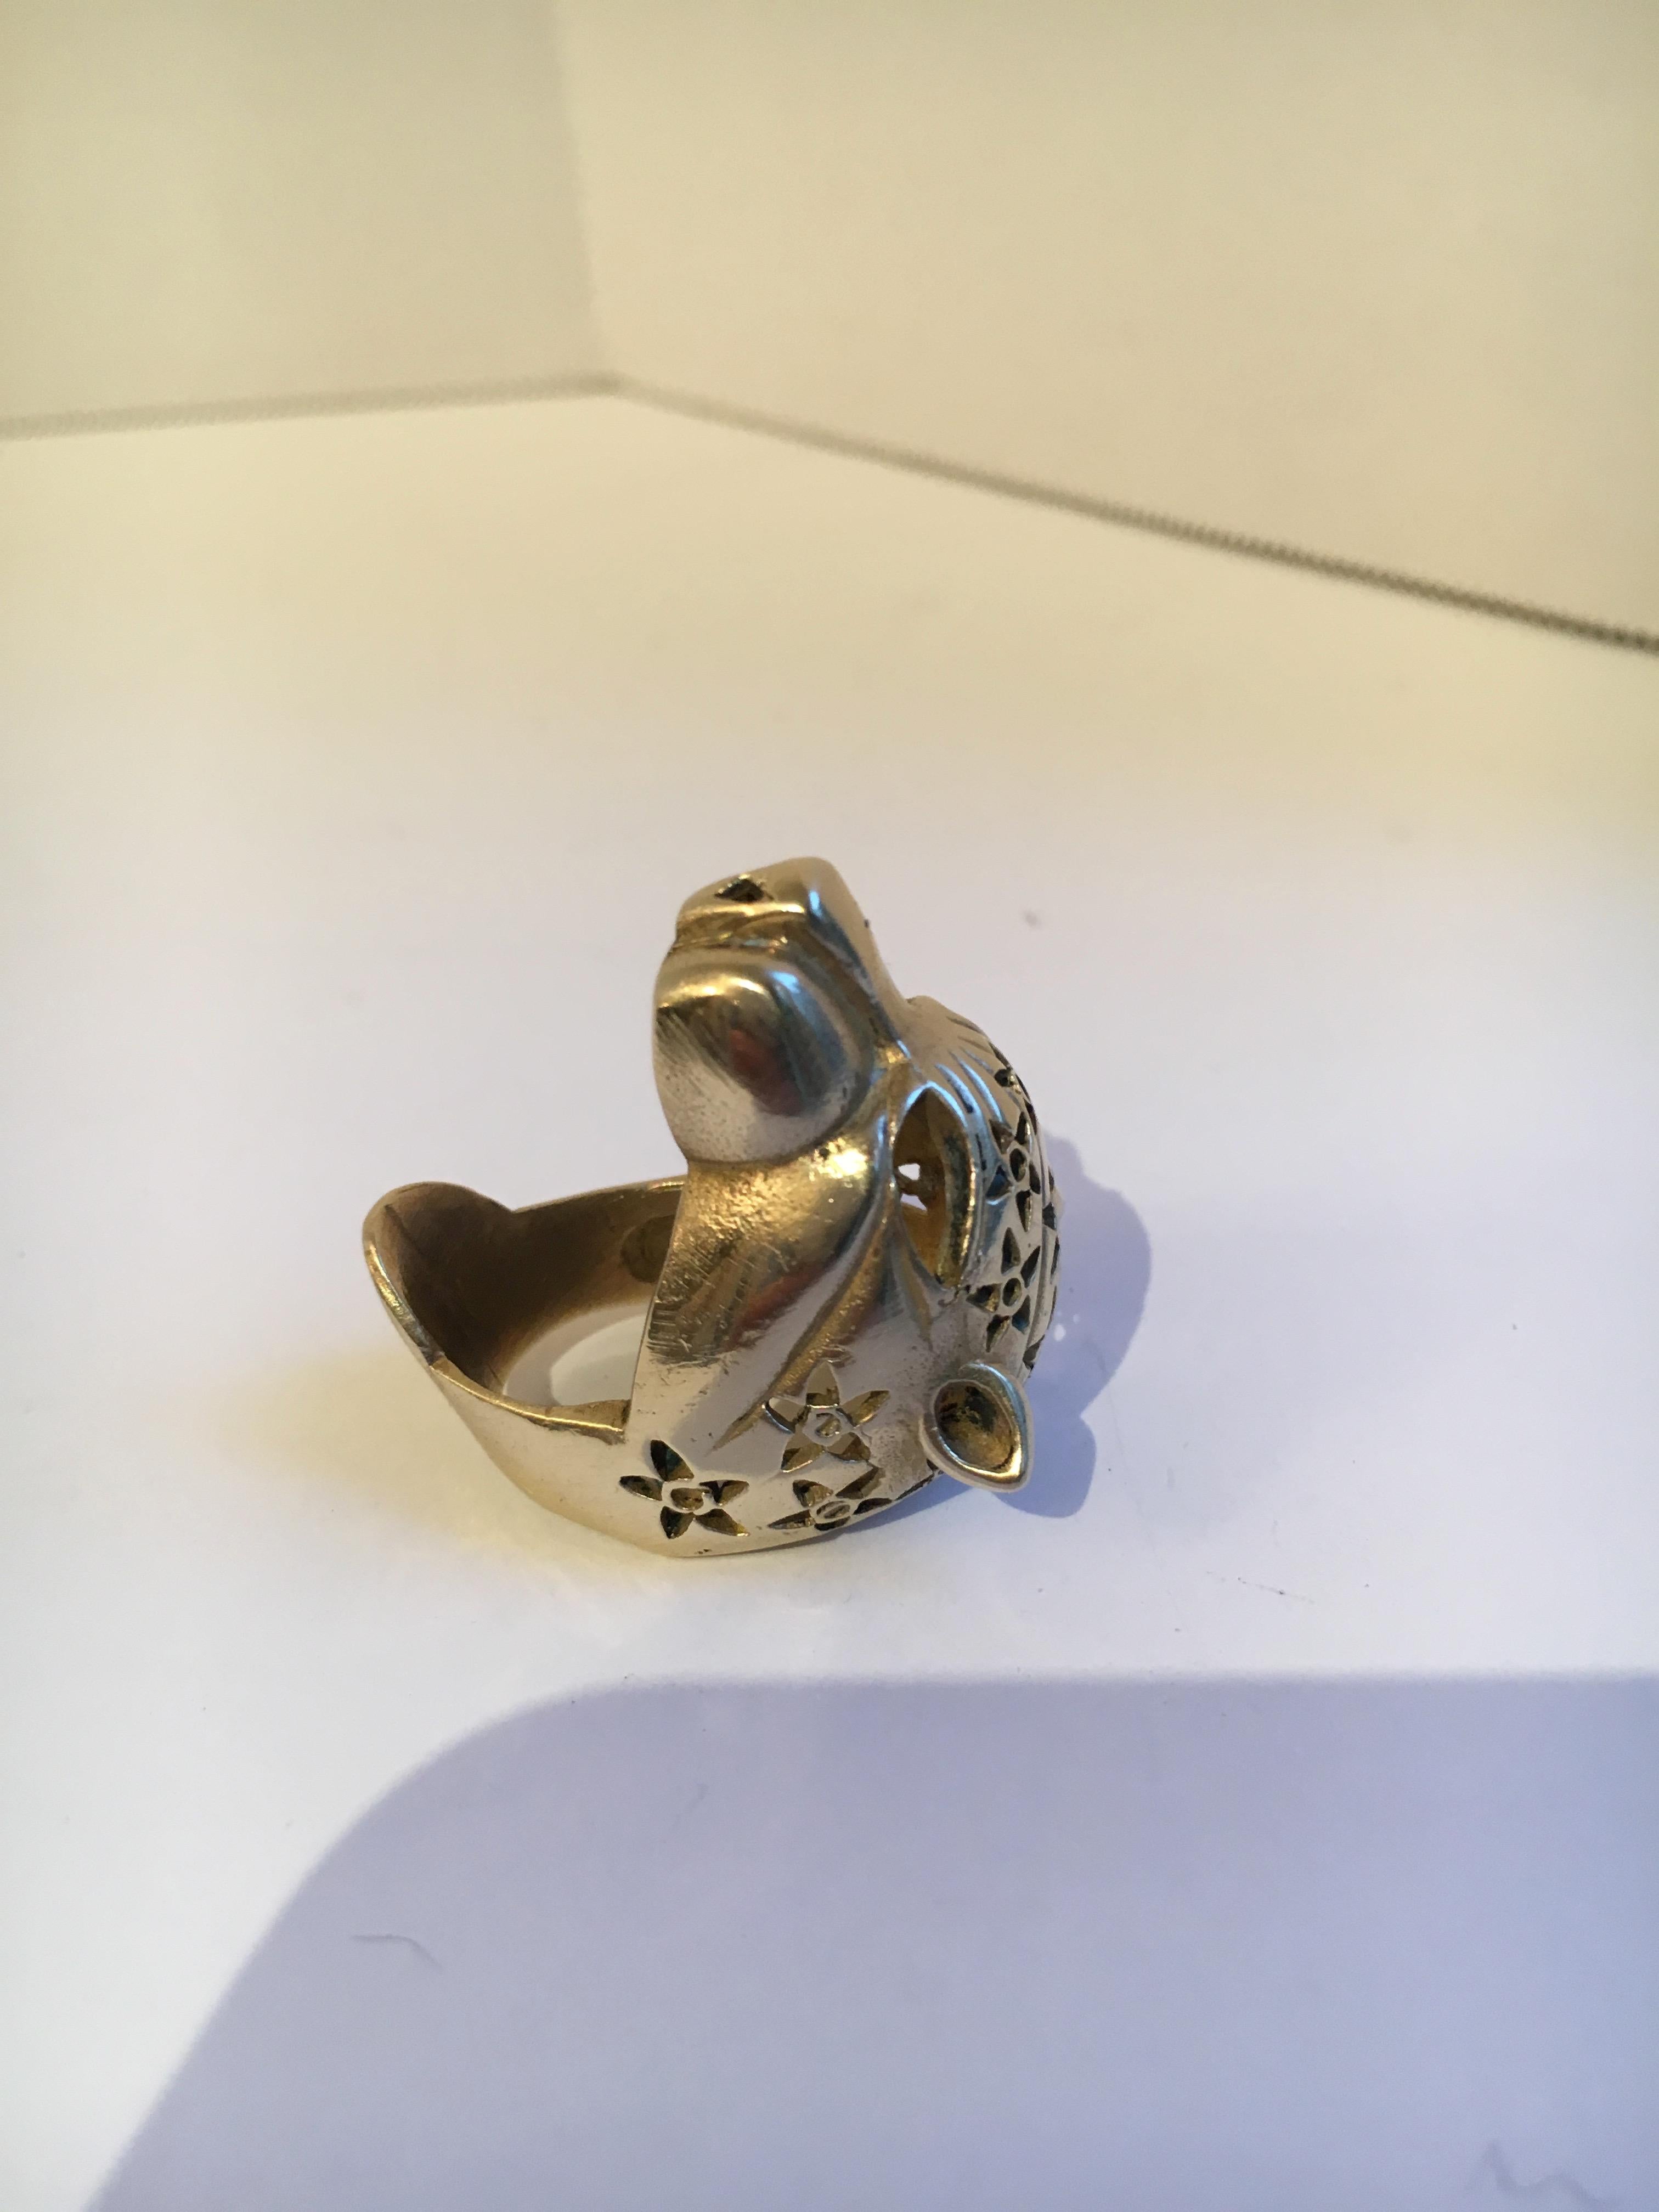 A lovely Brass Ring depicting a cat, jaguar or leopard.  Very nice and well made.
Ring size 6.5